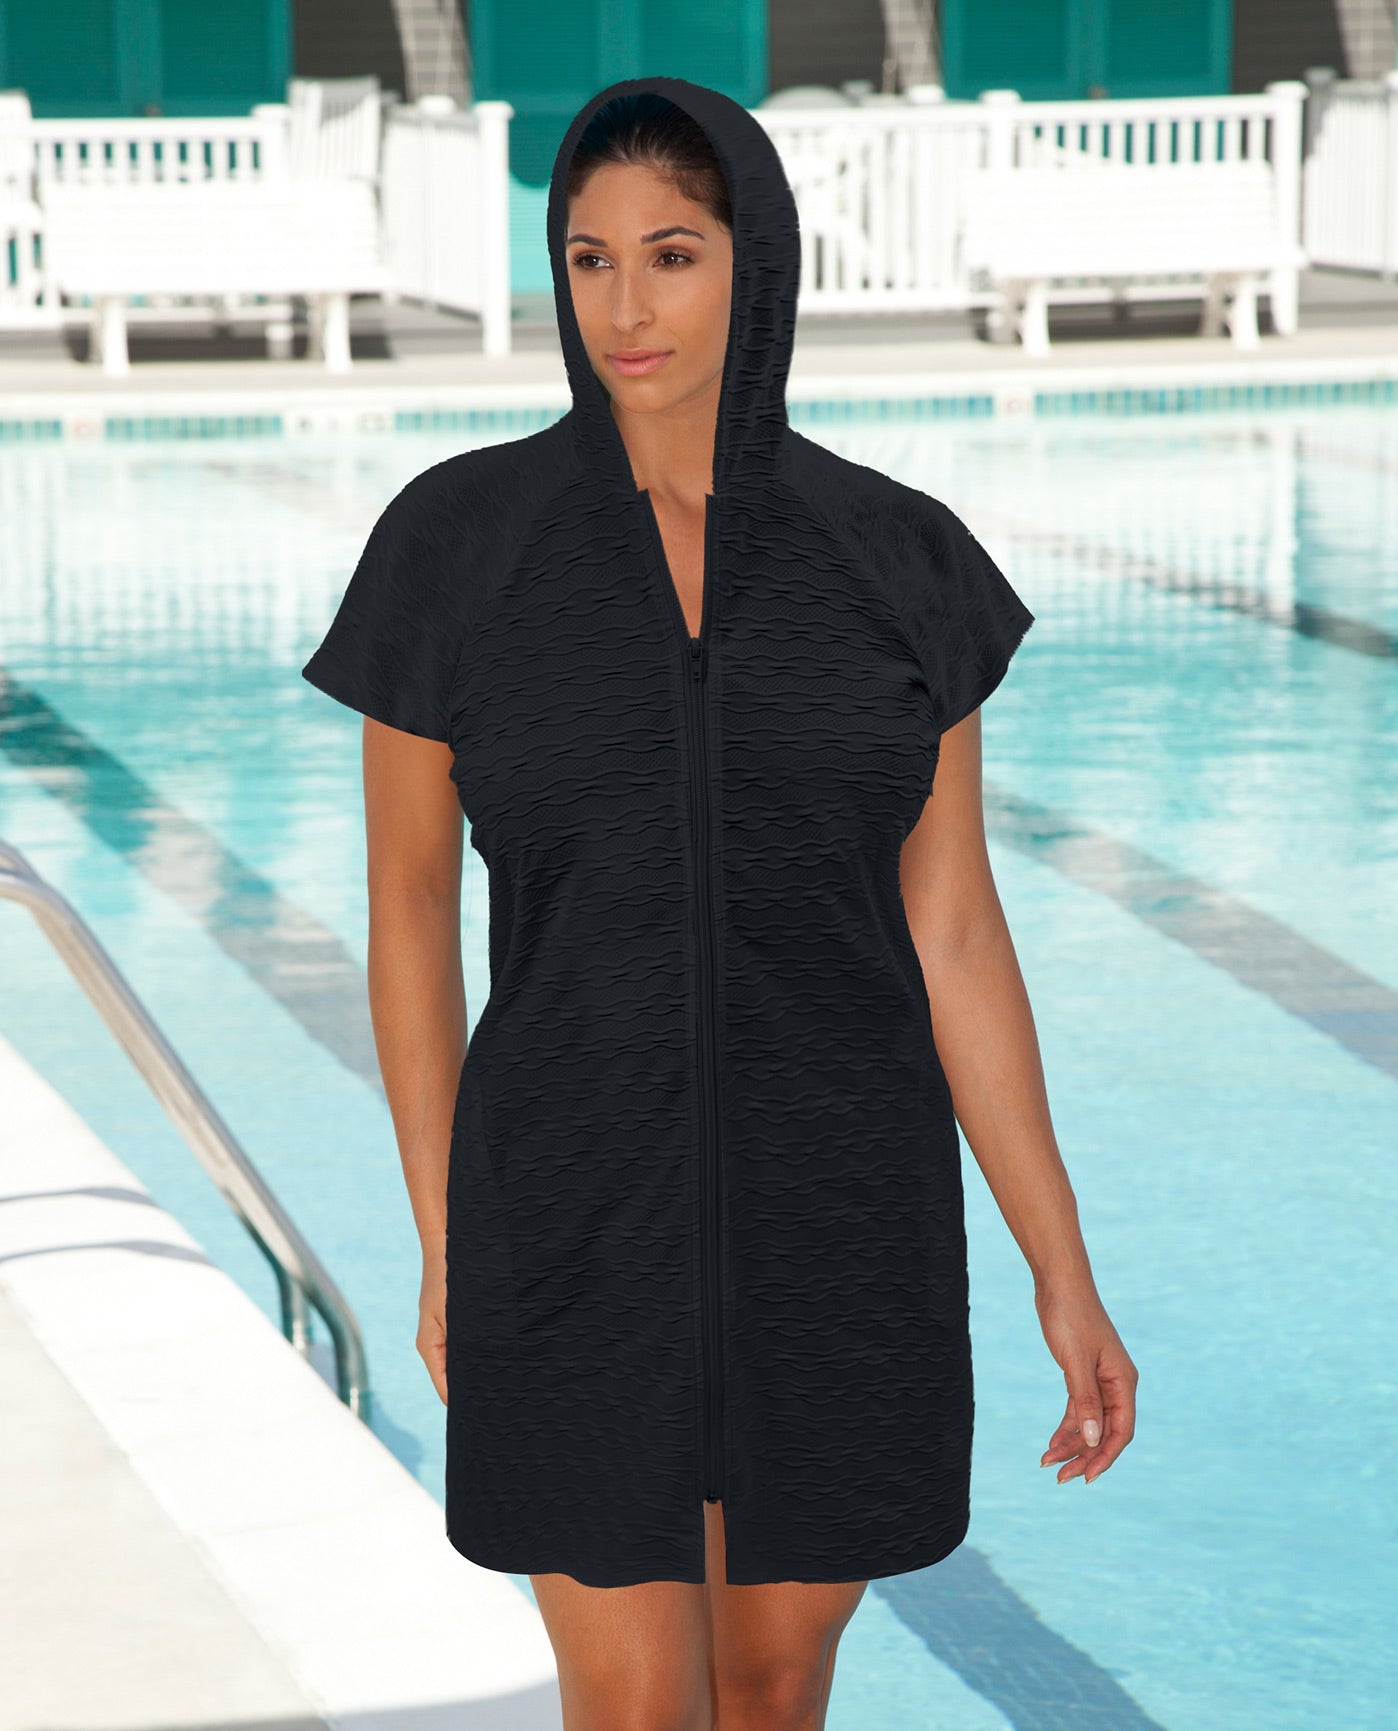 HOOD UP FRONT VIEW OF AQUAMORE SOLID TEXTURED ZIPPER HOODIE COVER UP TUNIC | 017 AQM TEXTURED BLACK